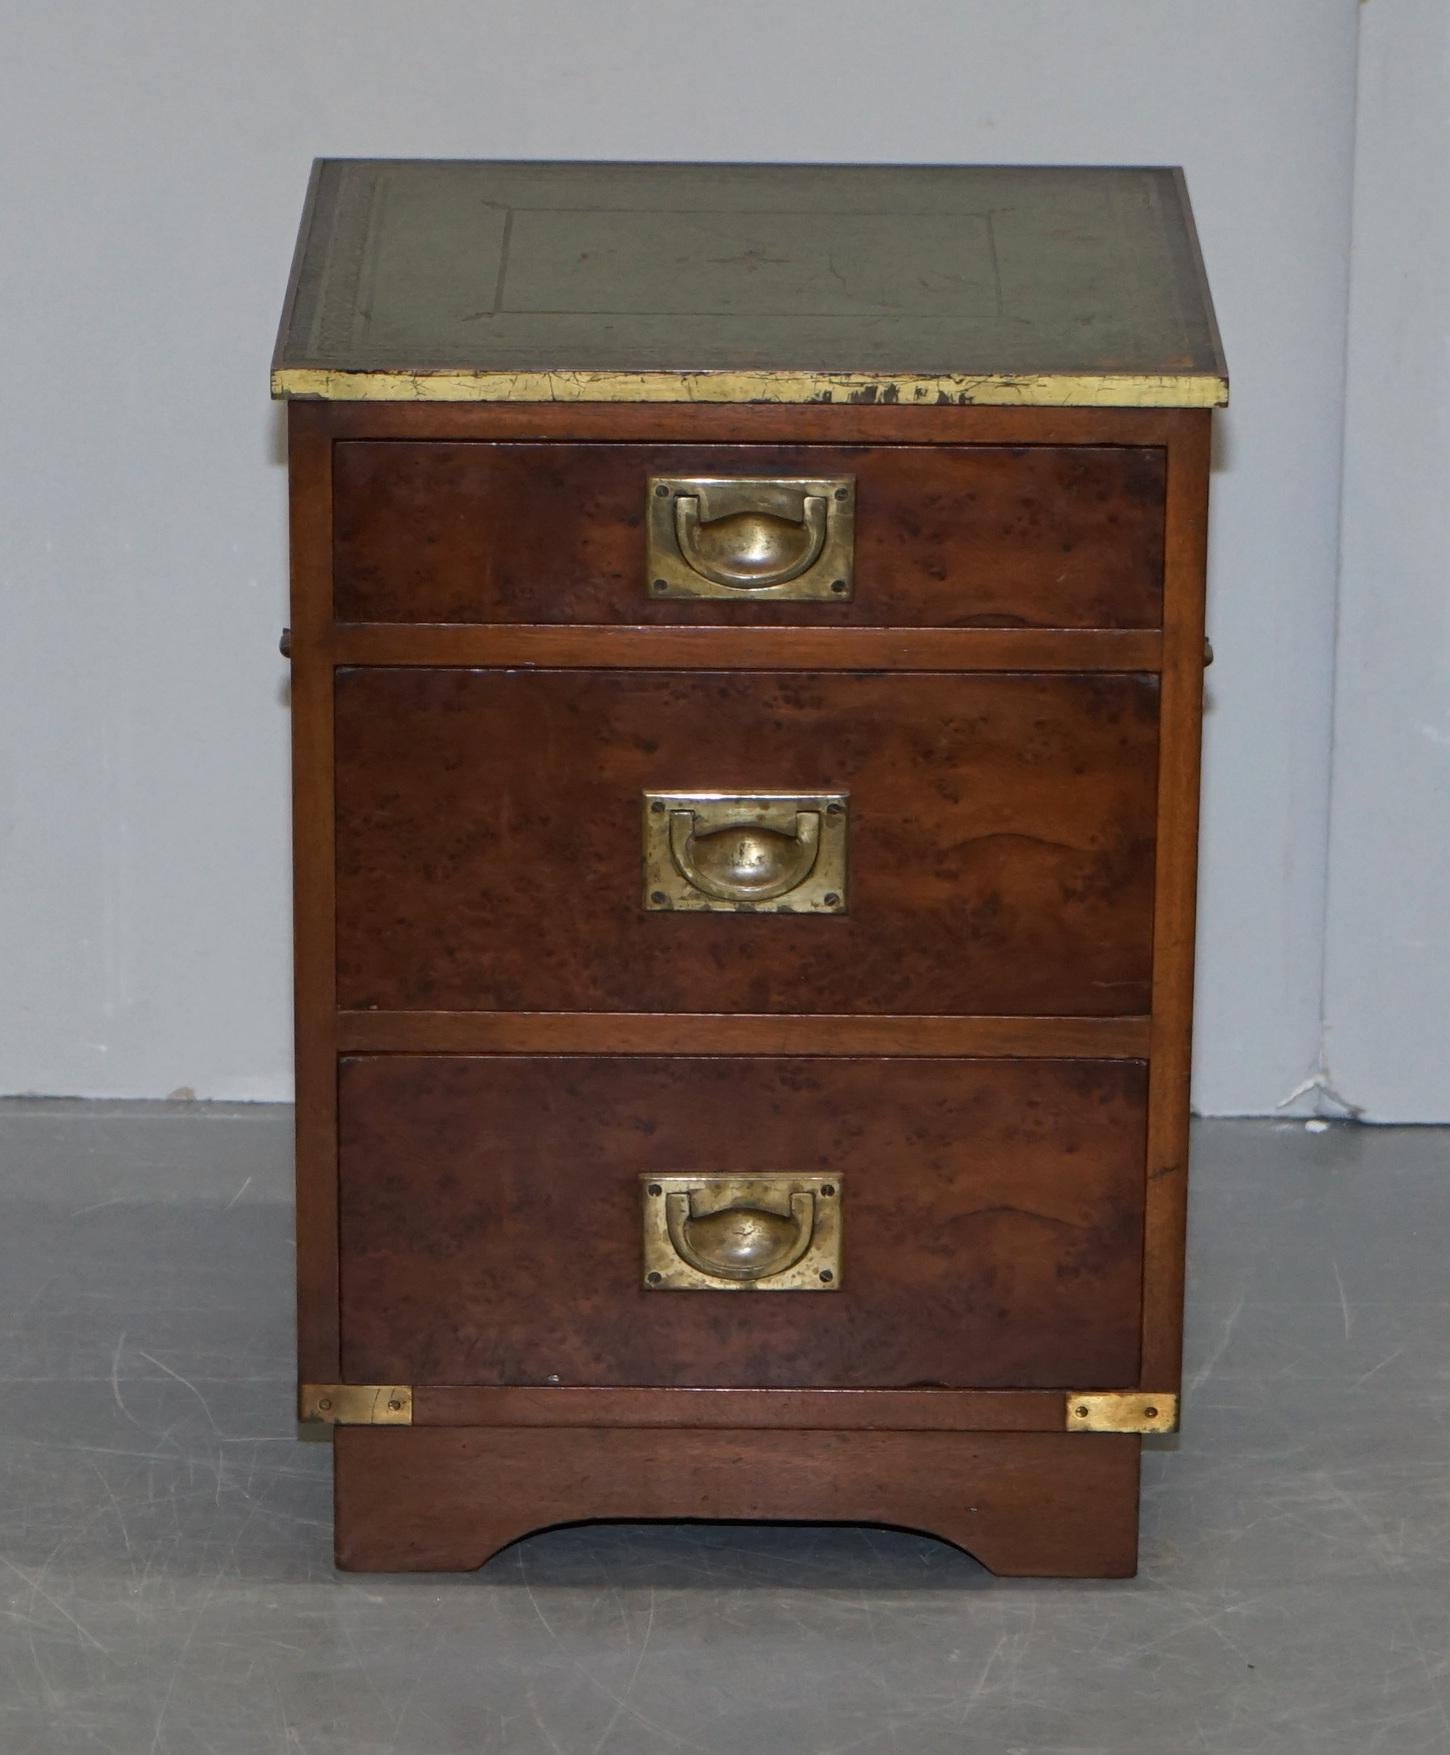 We are delighted to this luxury Vintage burr walnut, gold leaf embossed green leather top with brass trim Military Campaign bedside lamp or wine table drawers 

This is a very luxurious piece, the frame is solid hardwood with a burr and burl walnut